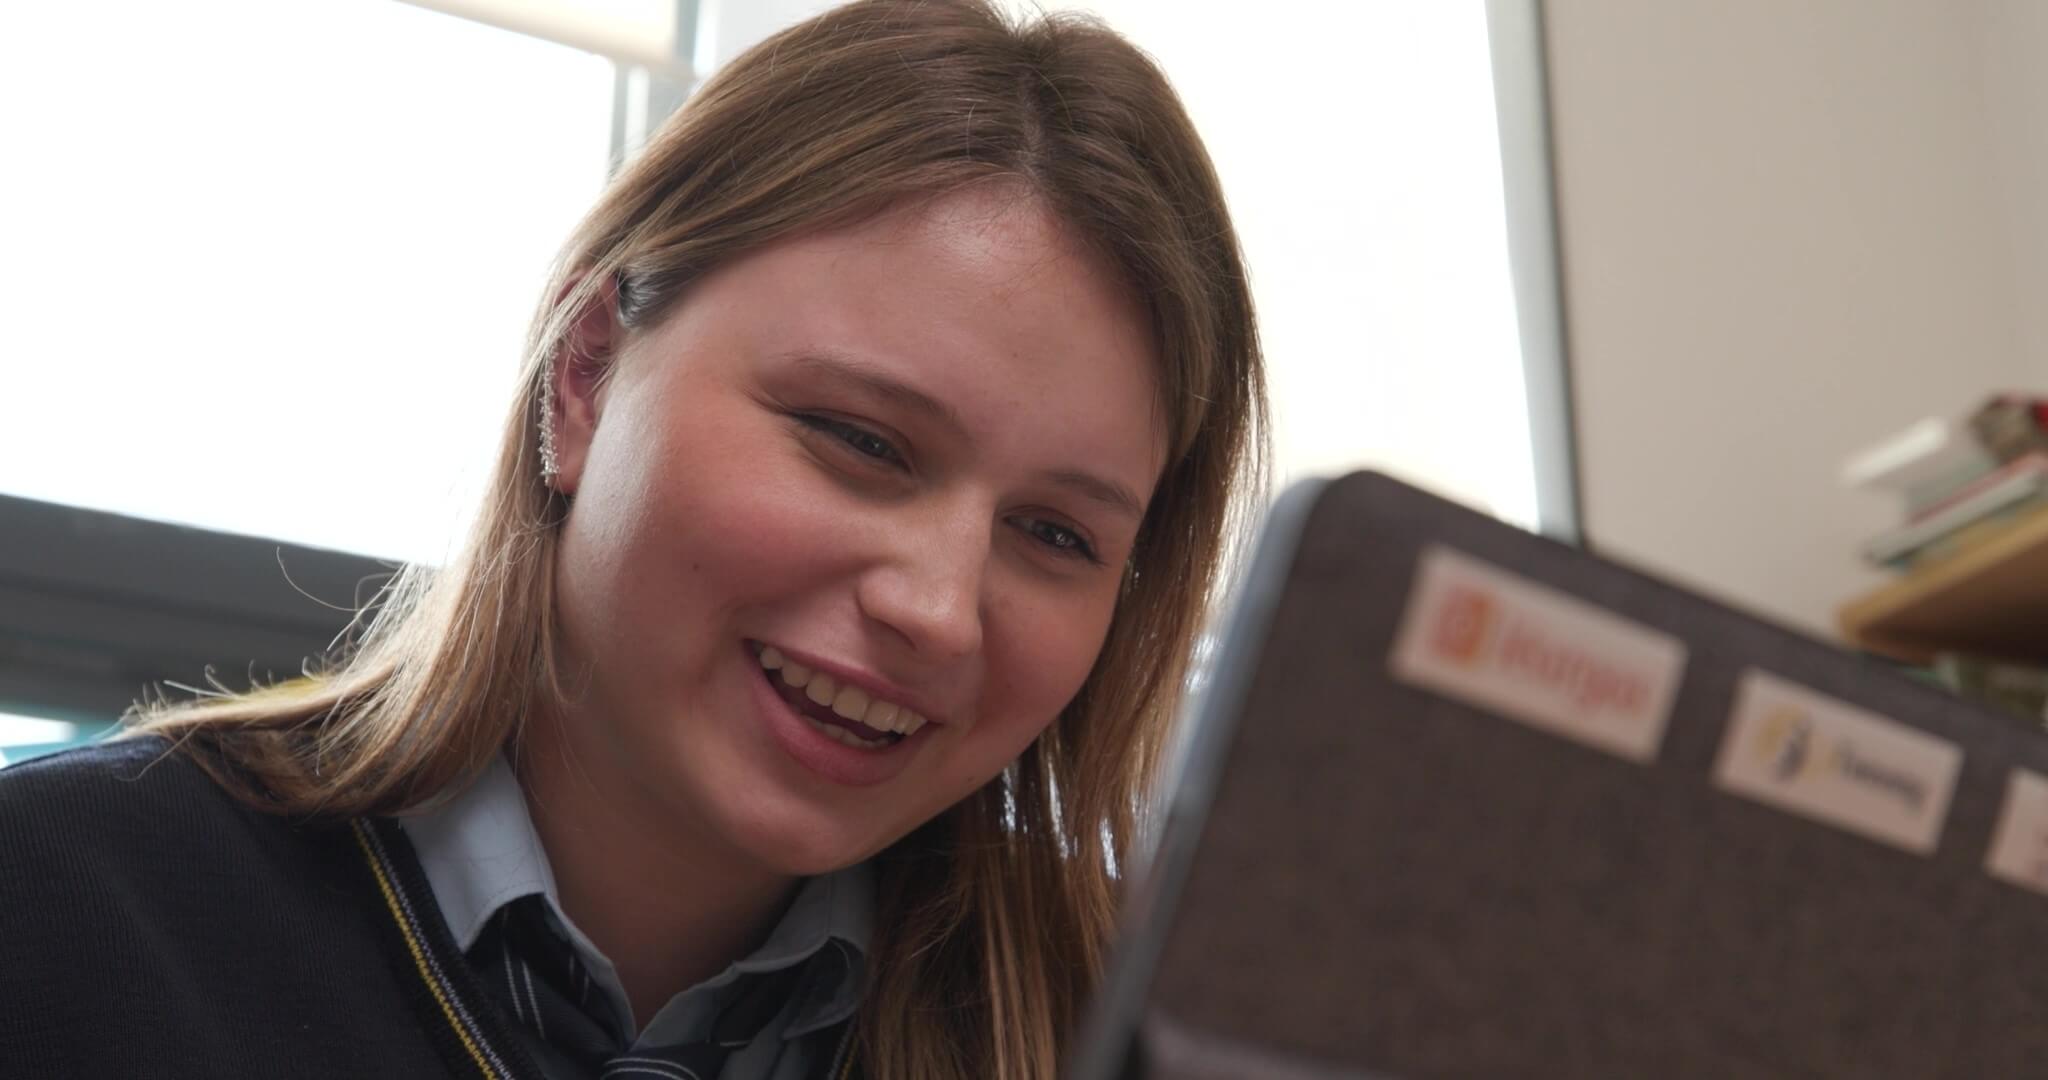 A student from Maynooth Post Primary School connects with peers in other European countries through the eTwinning platform